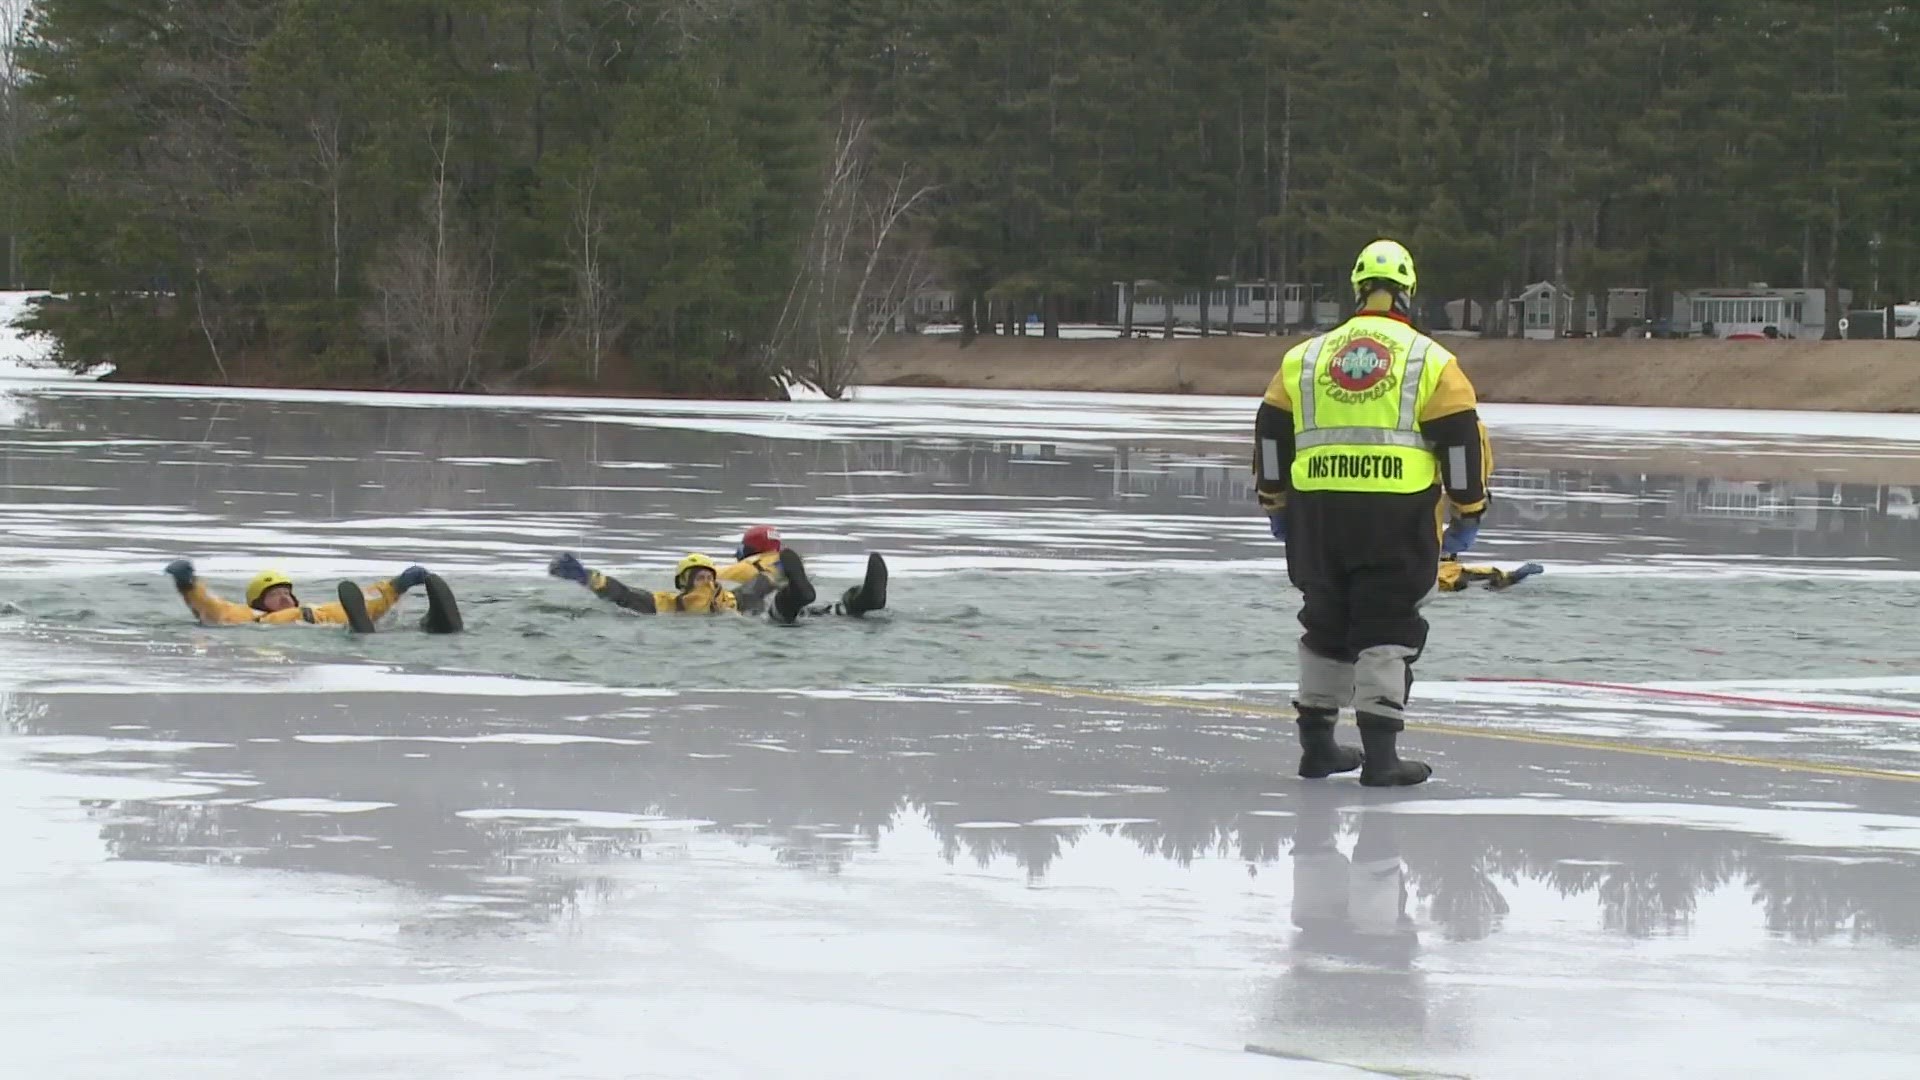 The latest winter brought thin and unstable ice to Maine, making some first responders review how they train for ice rescue missions.